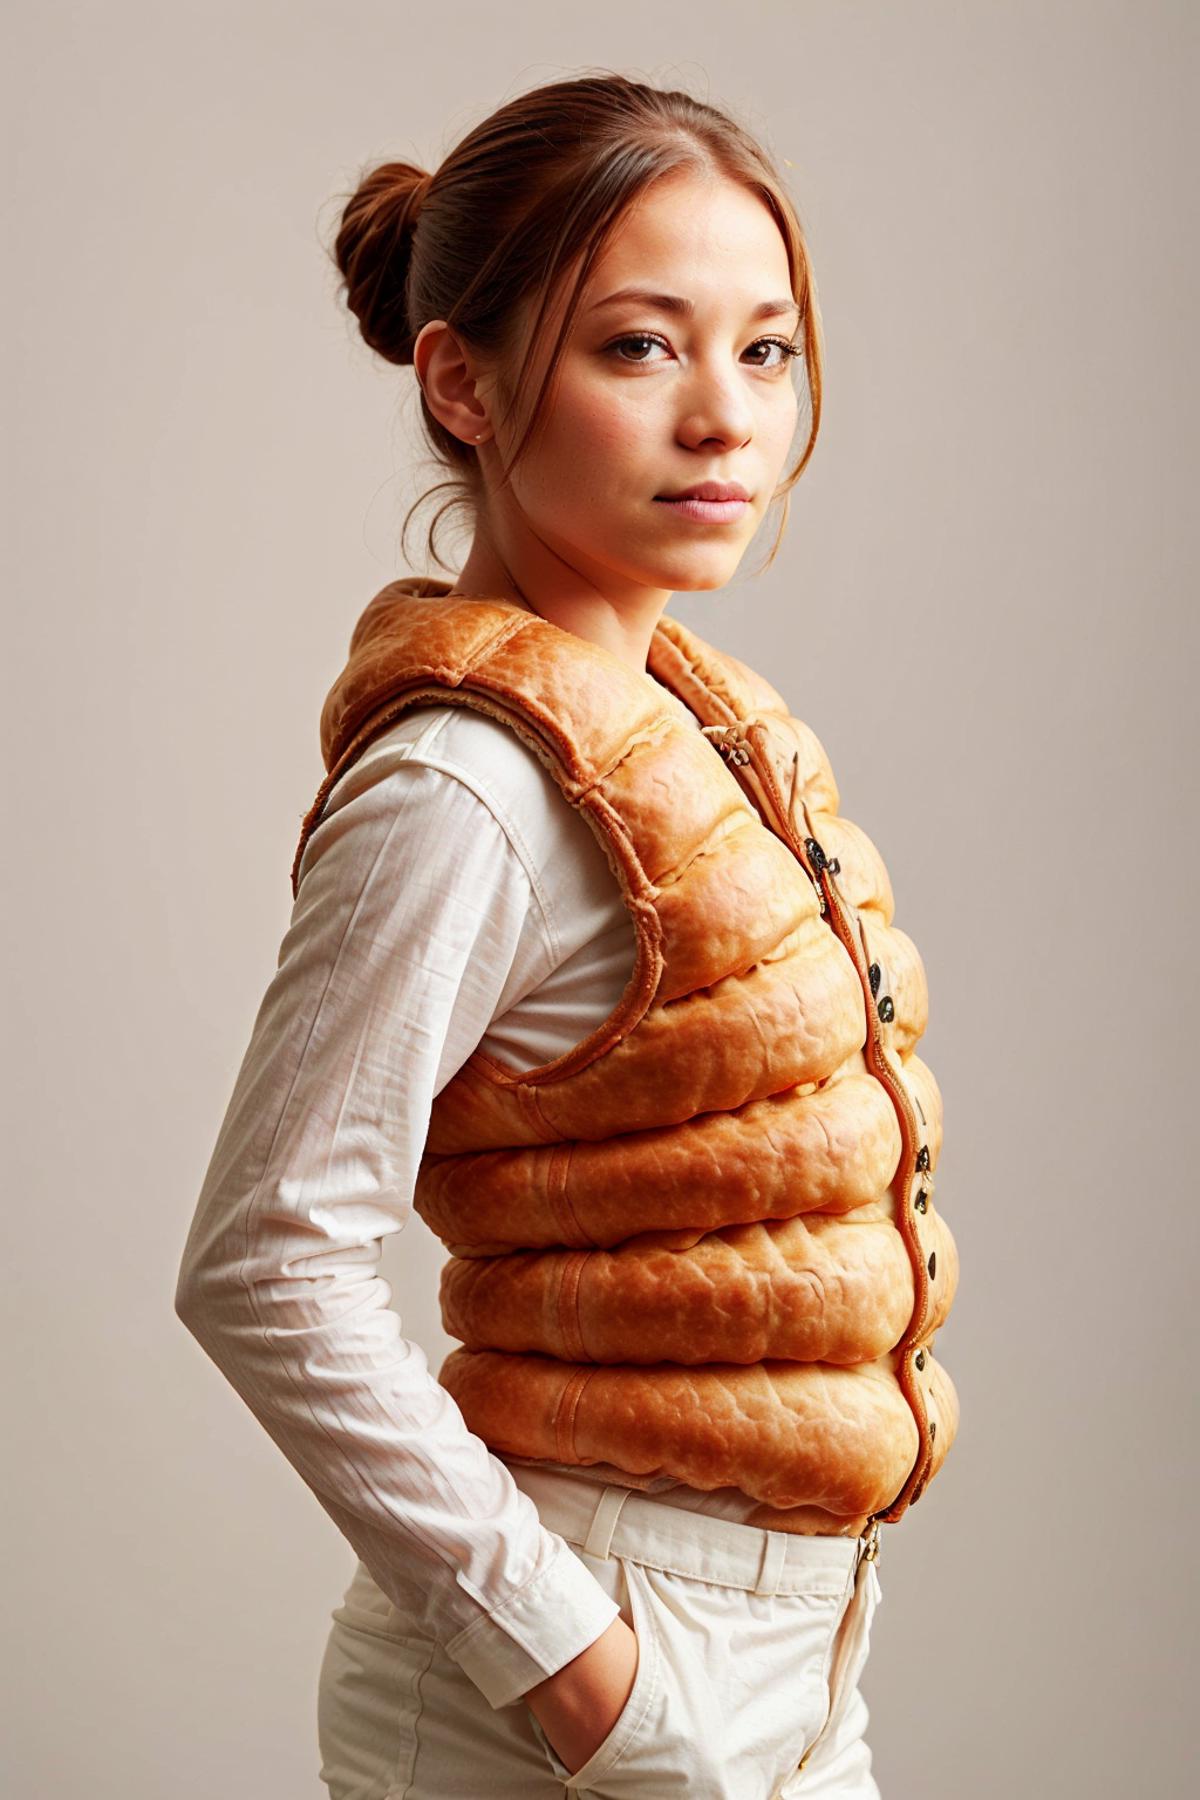 Croissant Style - Croissantify Anything! image